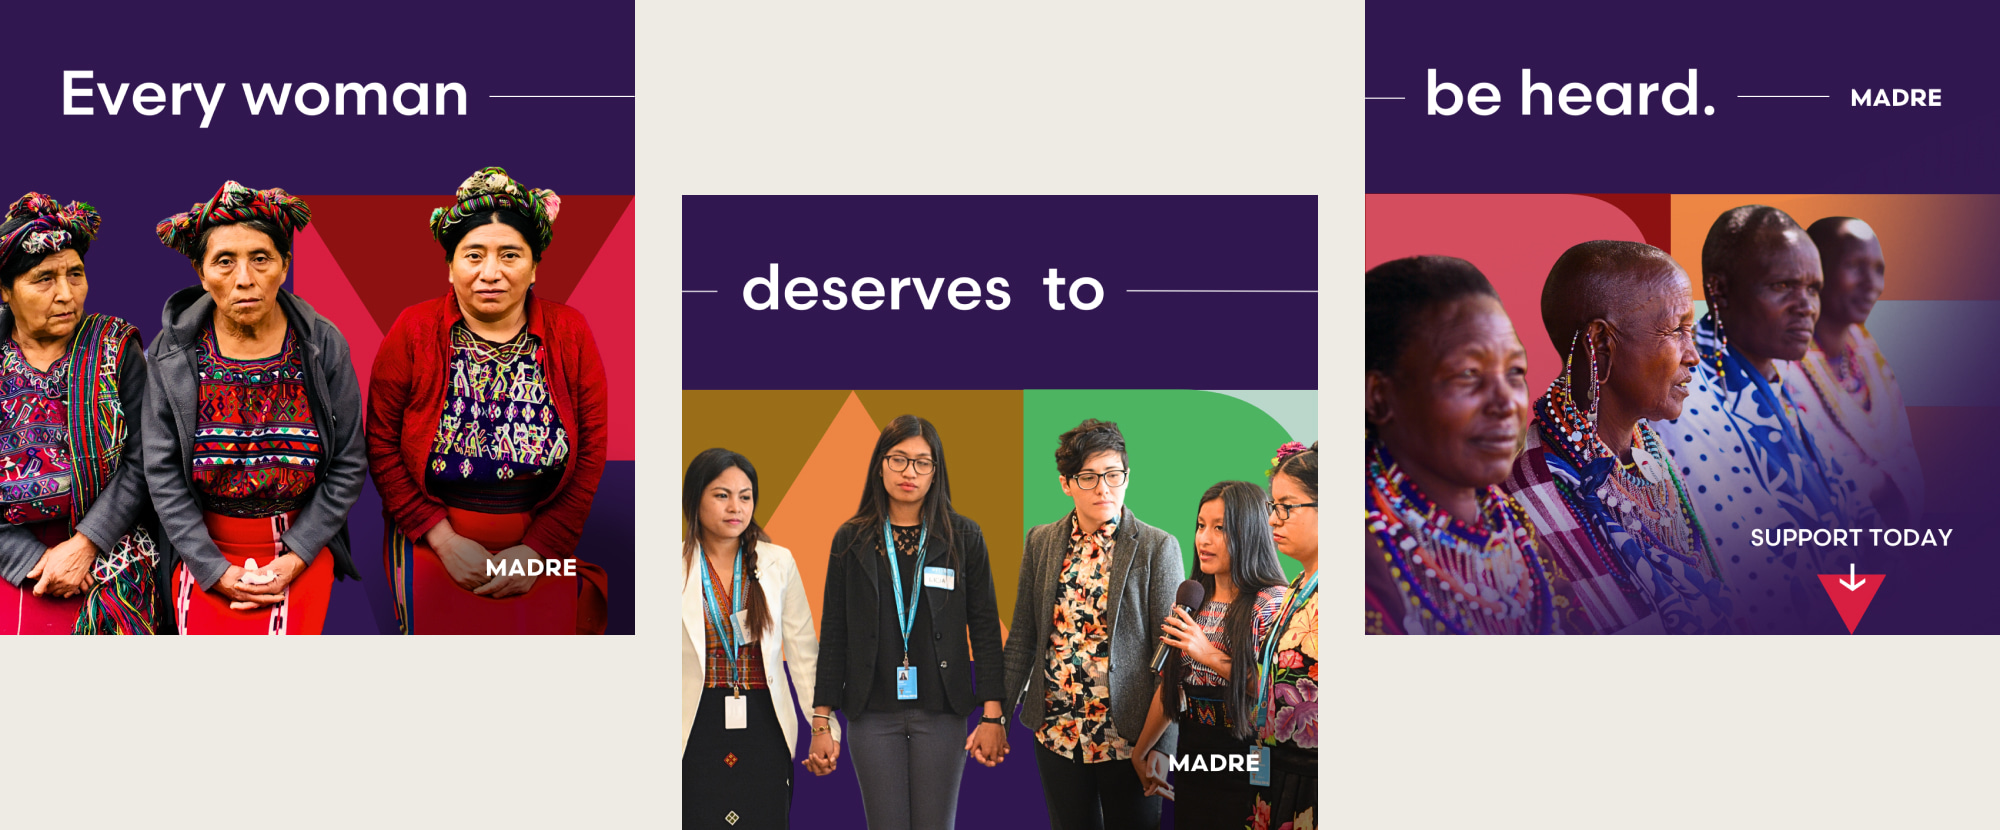 A MADRE ad Instagram carousel is staggered and features cut-out photographs of women from across the globe with the headline, “Every woman deserves to be heard,” stretching across each slide. The first slide features Hispanic women in traditional and colorful garments looking intently at the camera. The second slide features women of various racial and ethic backgrounds holding hands at a conference. The third slide features African women with intricate and rainbow jewelry siting in a line and looking off into the distance.